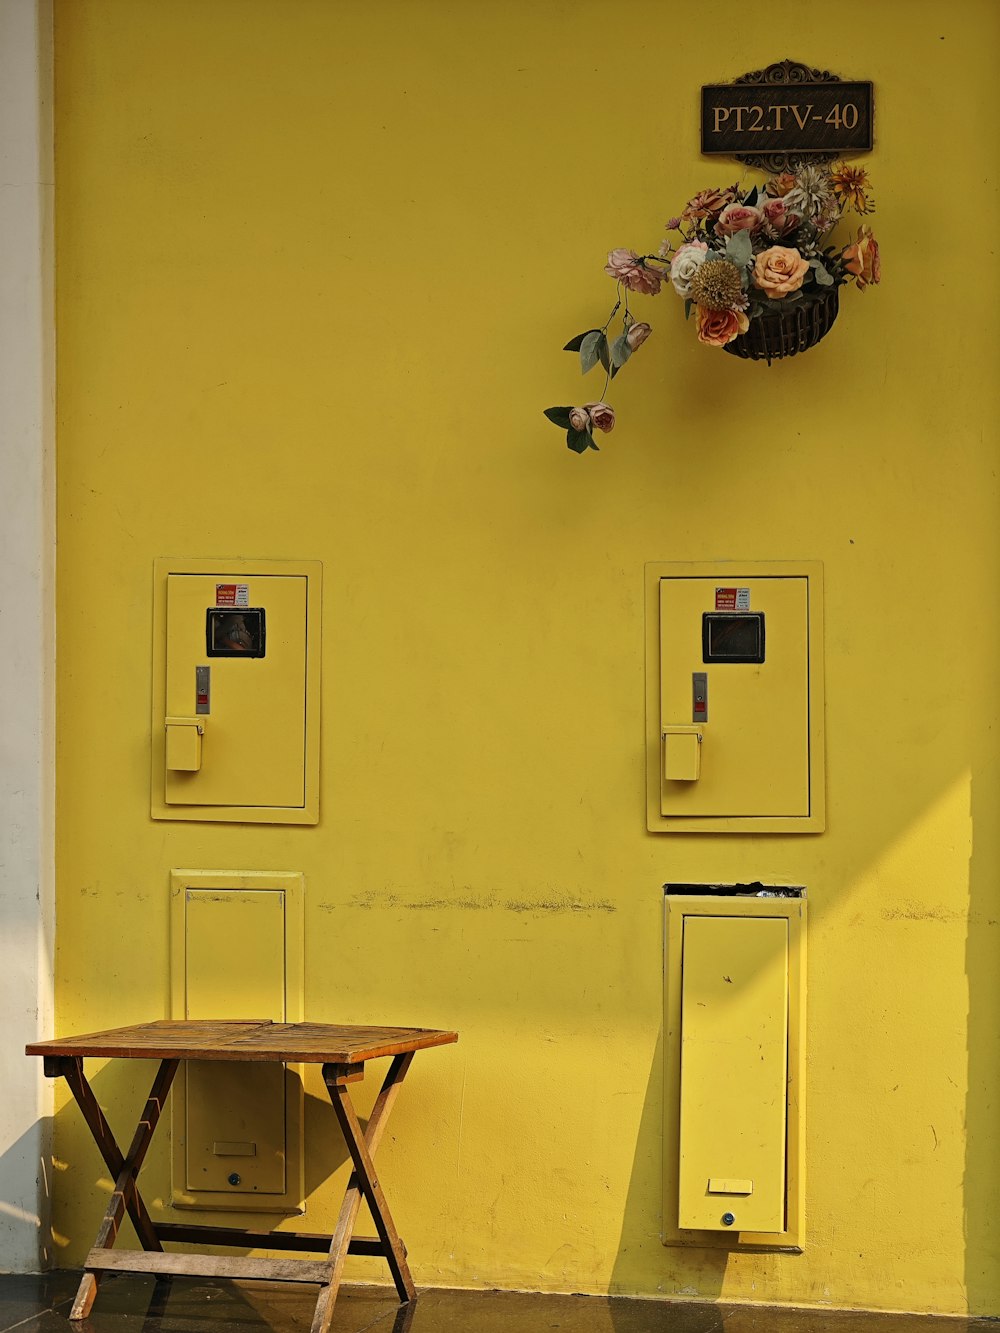 a yellow wall with a table and two switch boxes